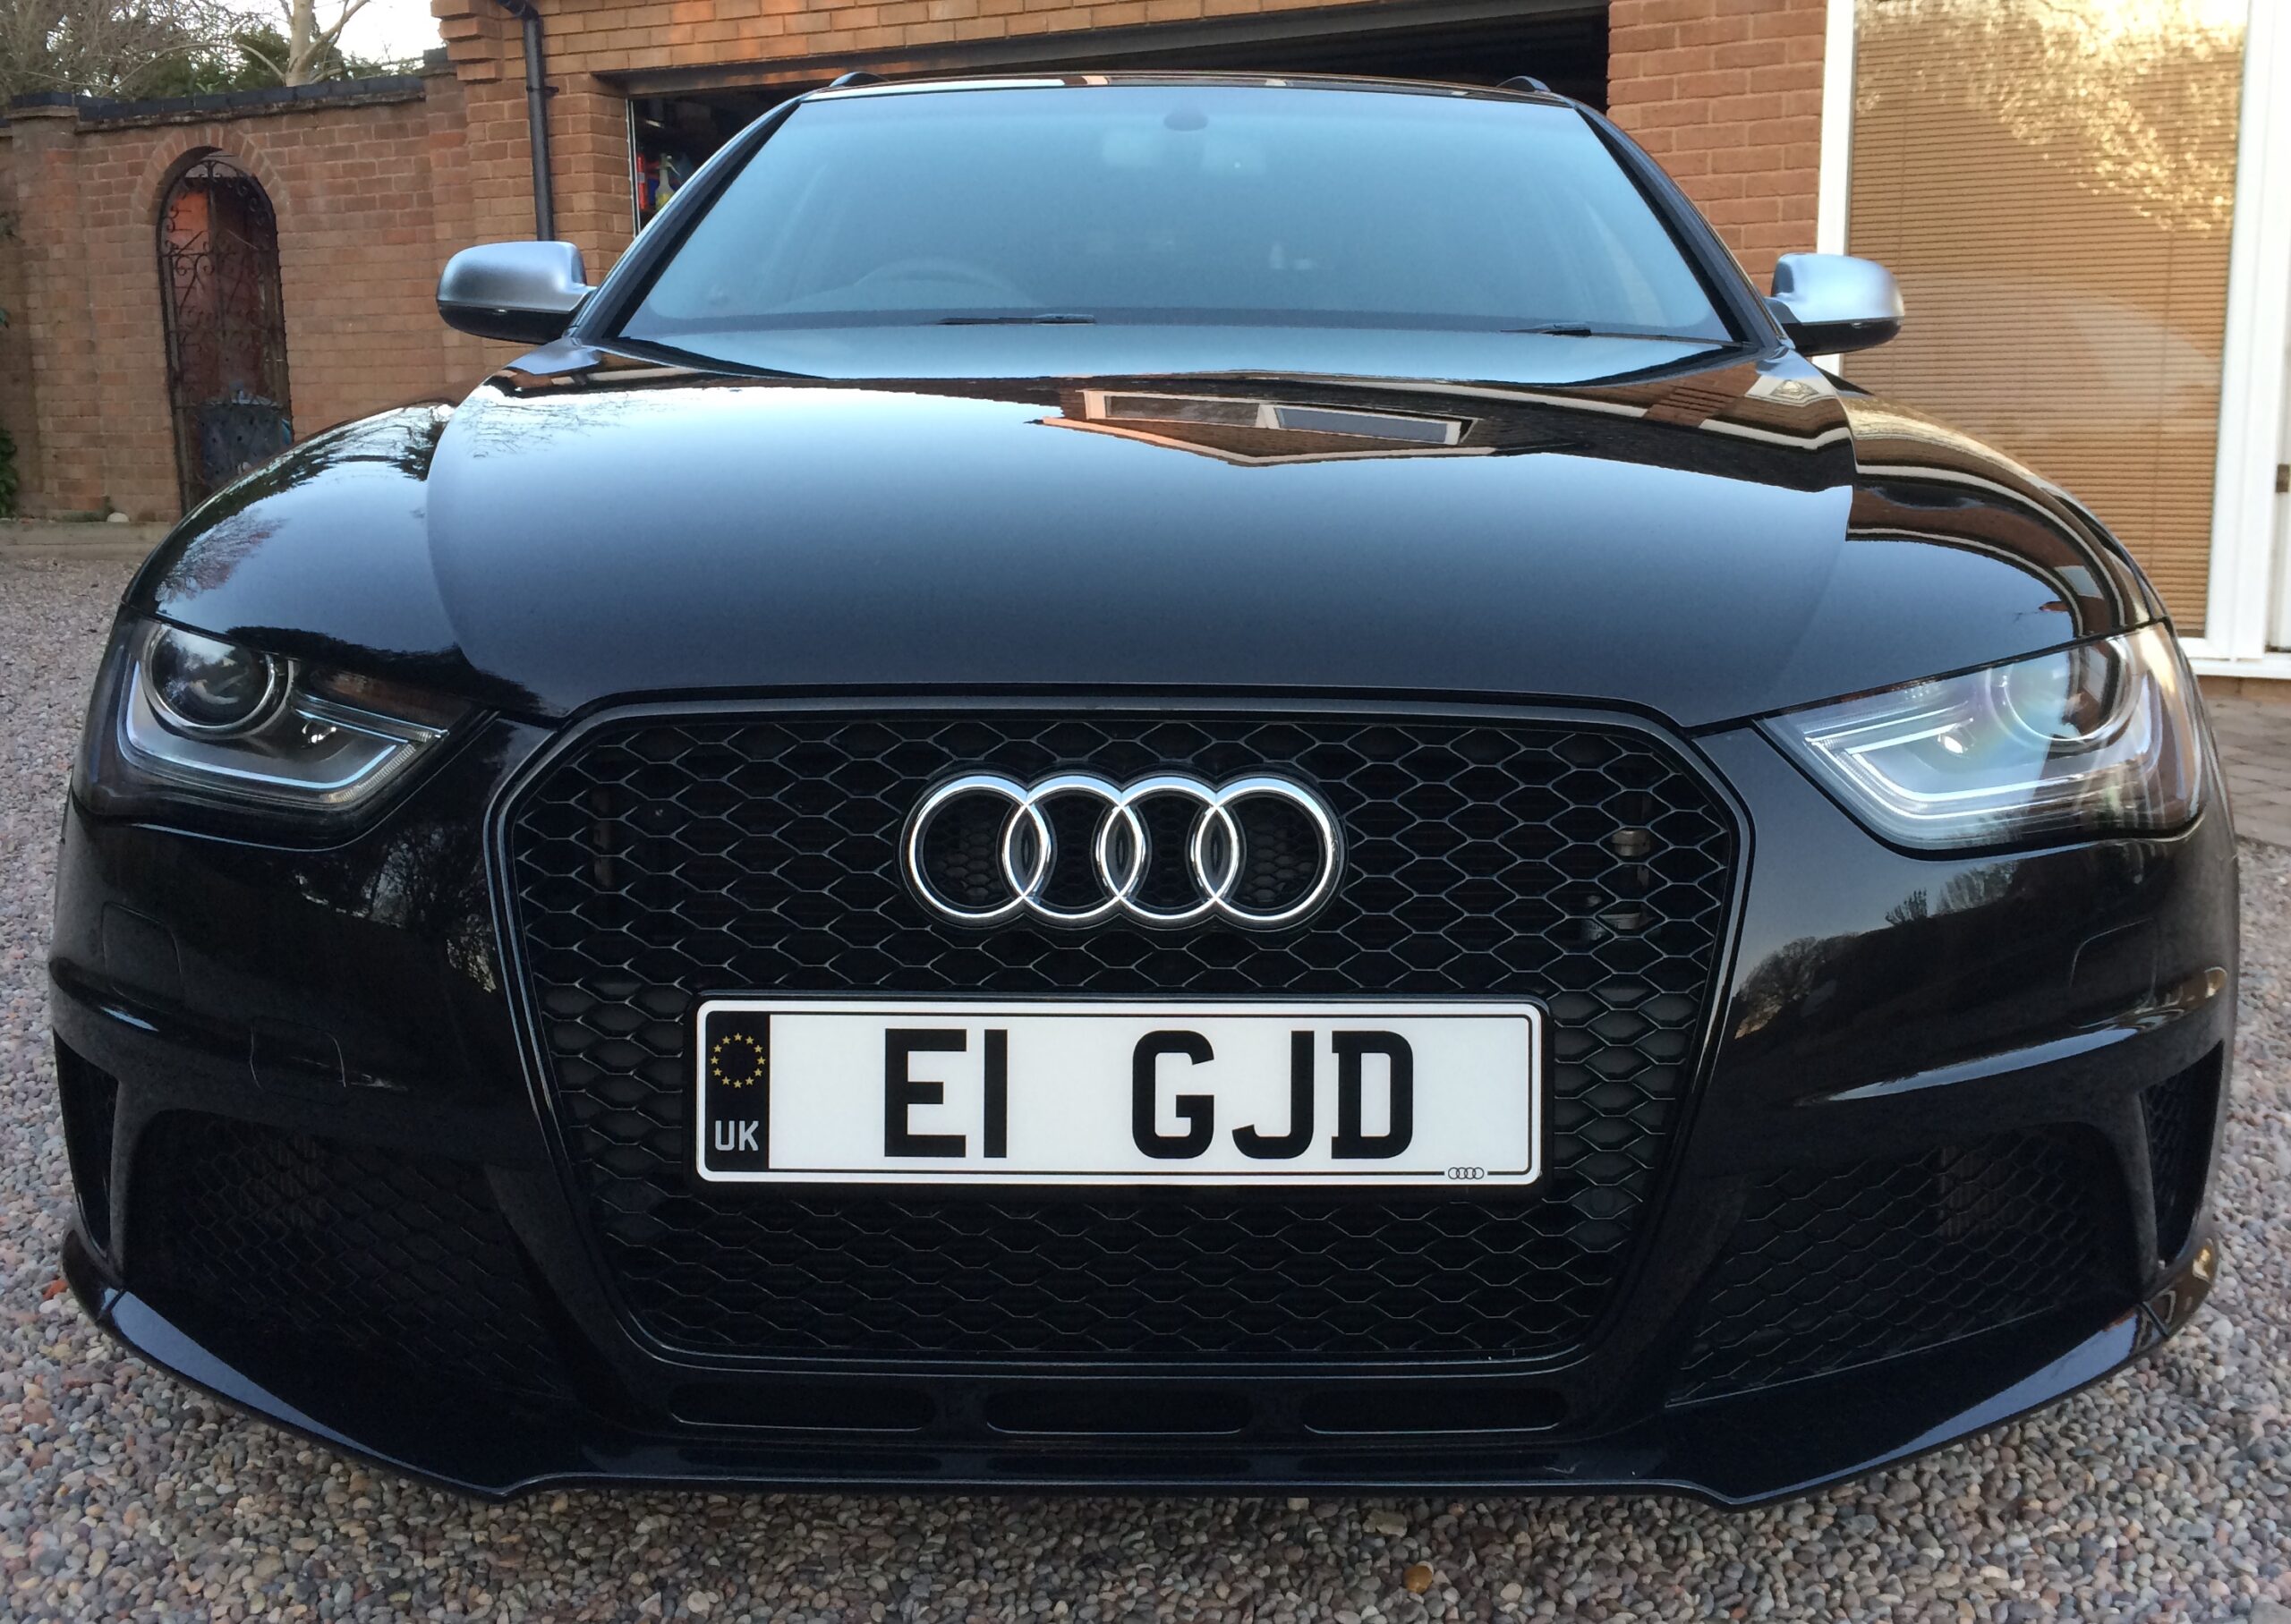 New Private Number Plate Price Match Guarantee